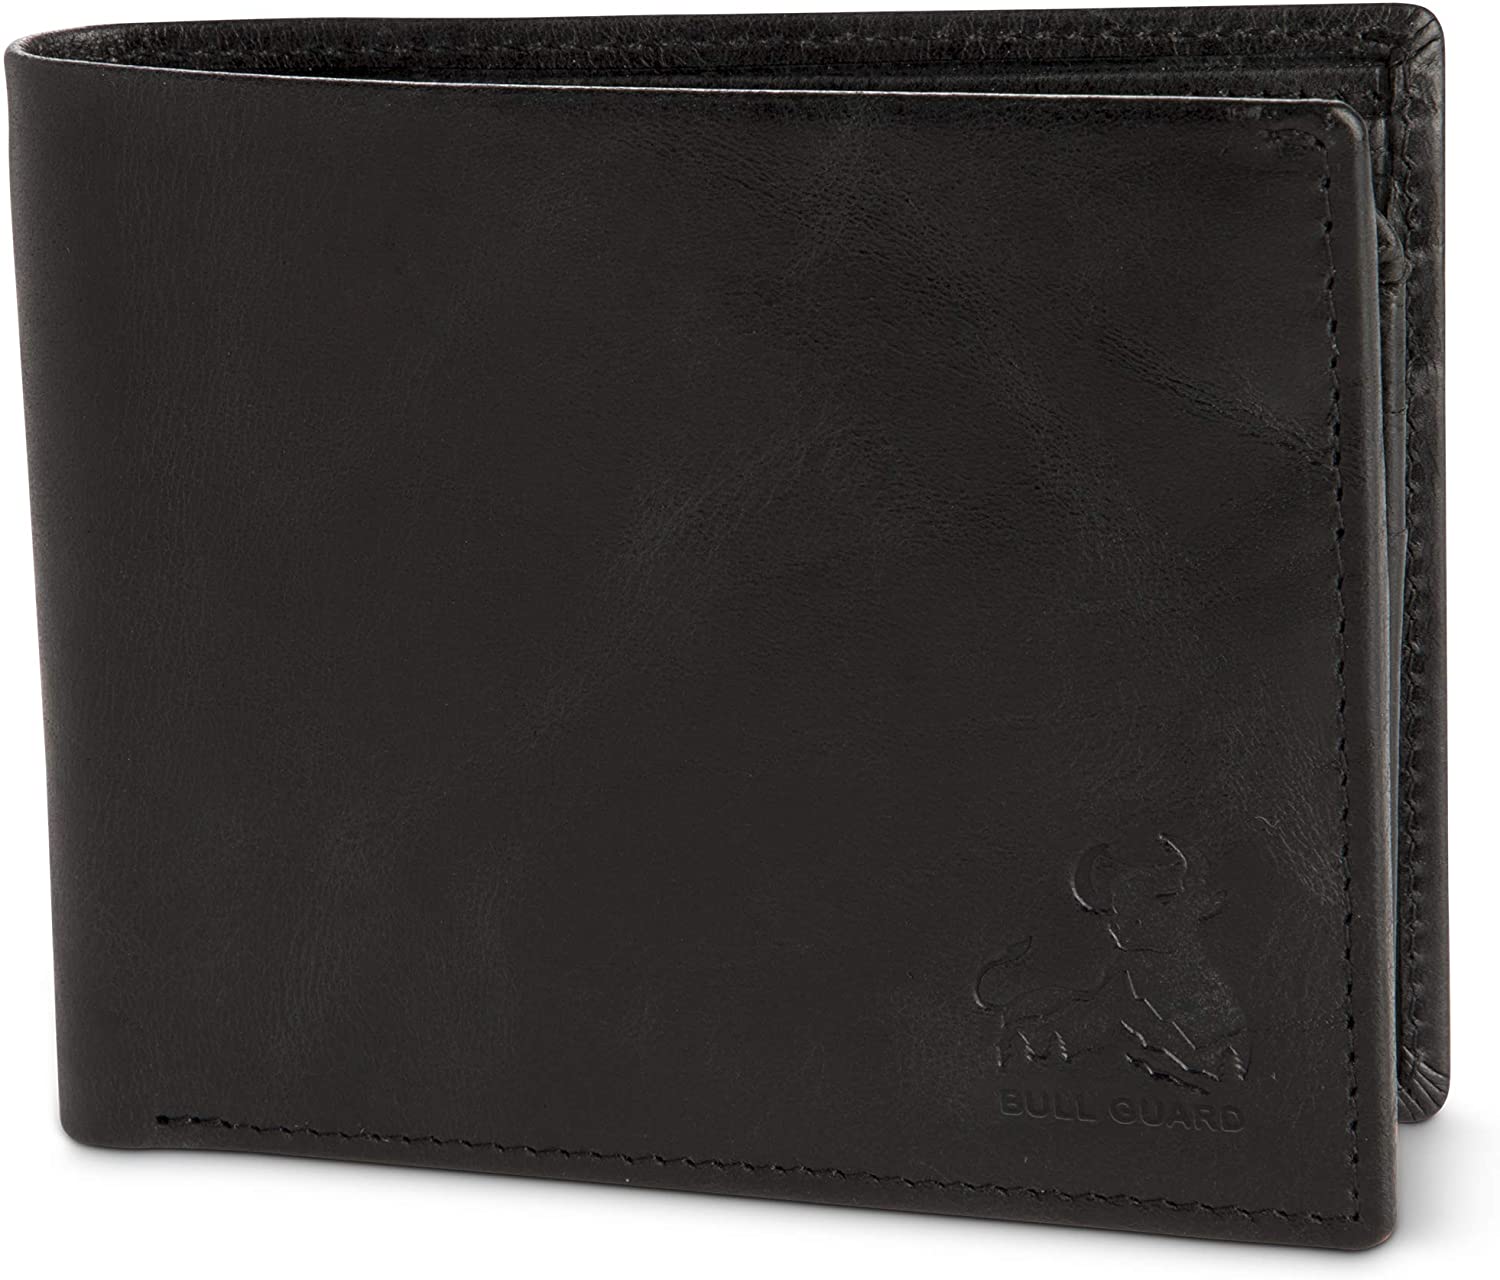 Bull Guard Vintage Black Leather Wallet for Men RFID Bifold With ID